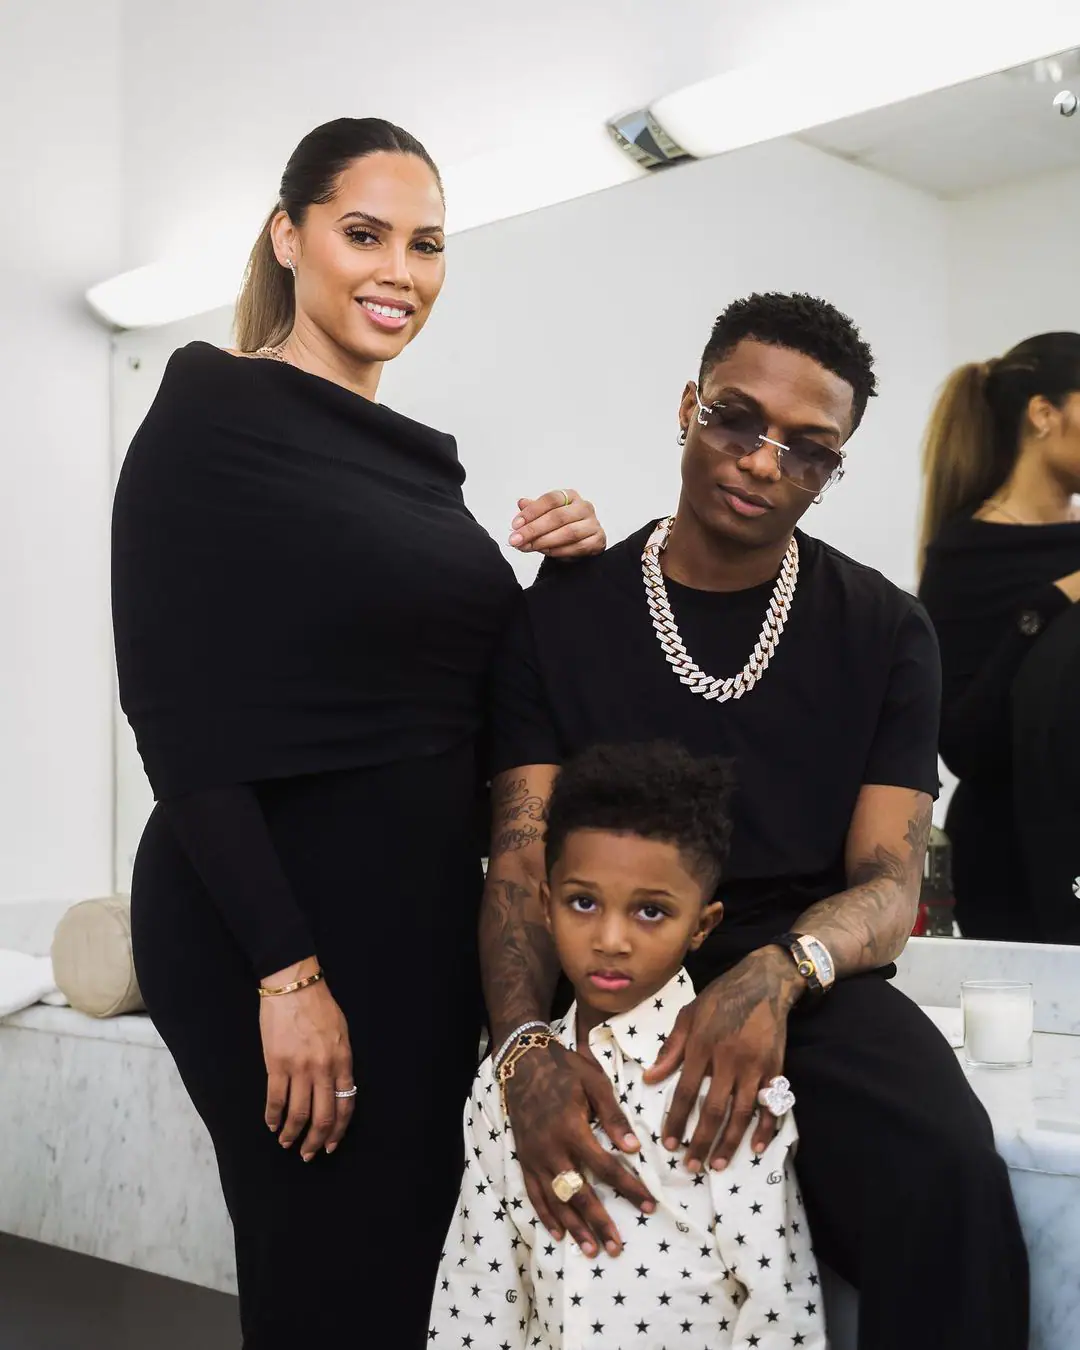 Zion, Wizkid'S Son, Distributes Toys In Ghana While On A Charity Trip With His Family, Yours Truly, News, March 24, 2023